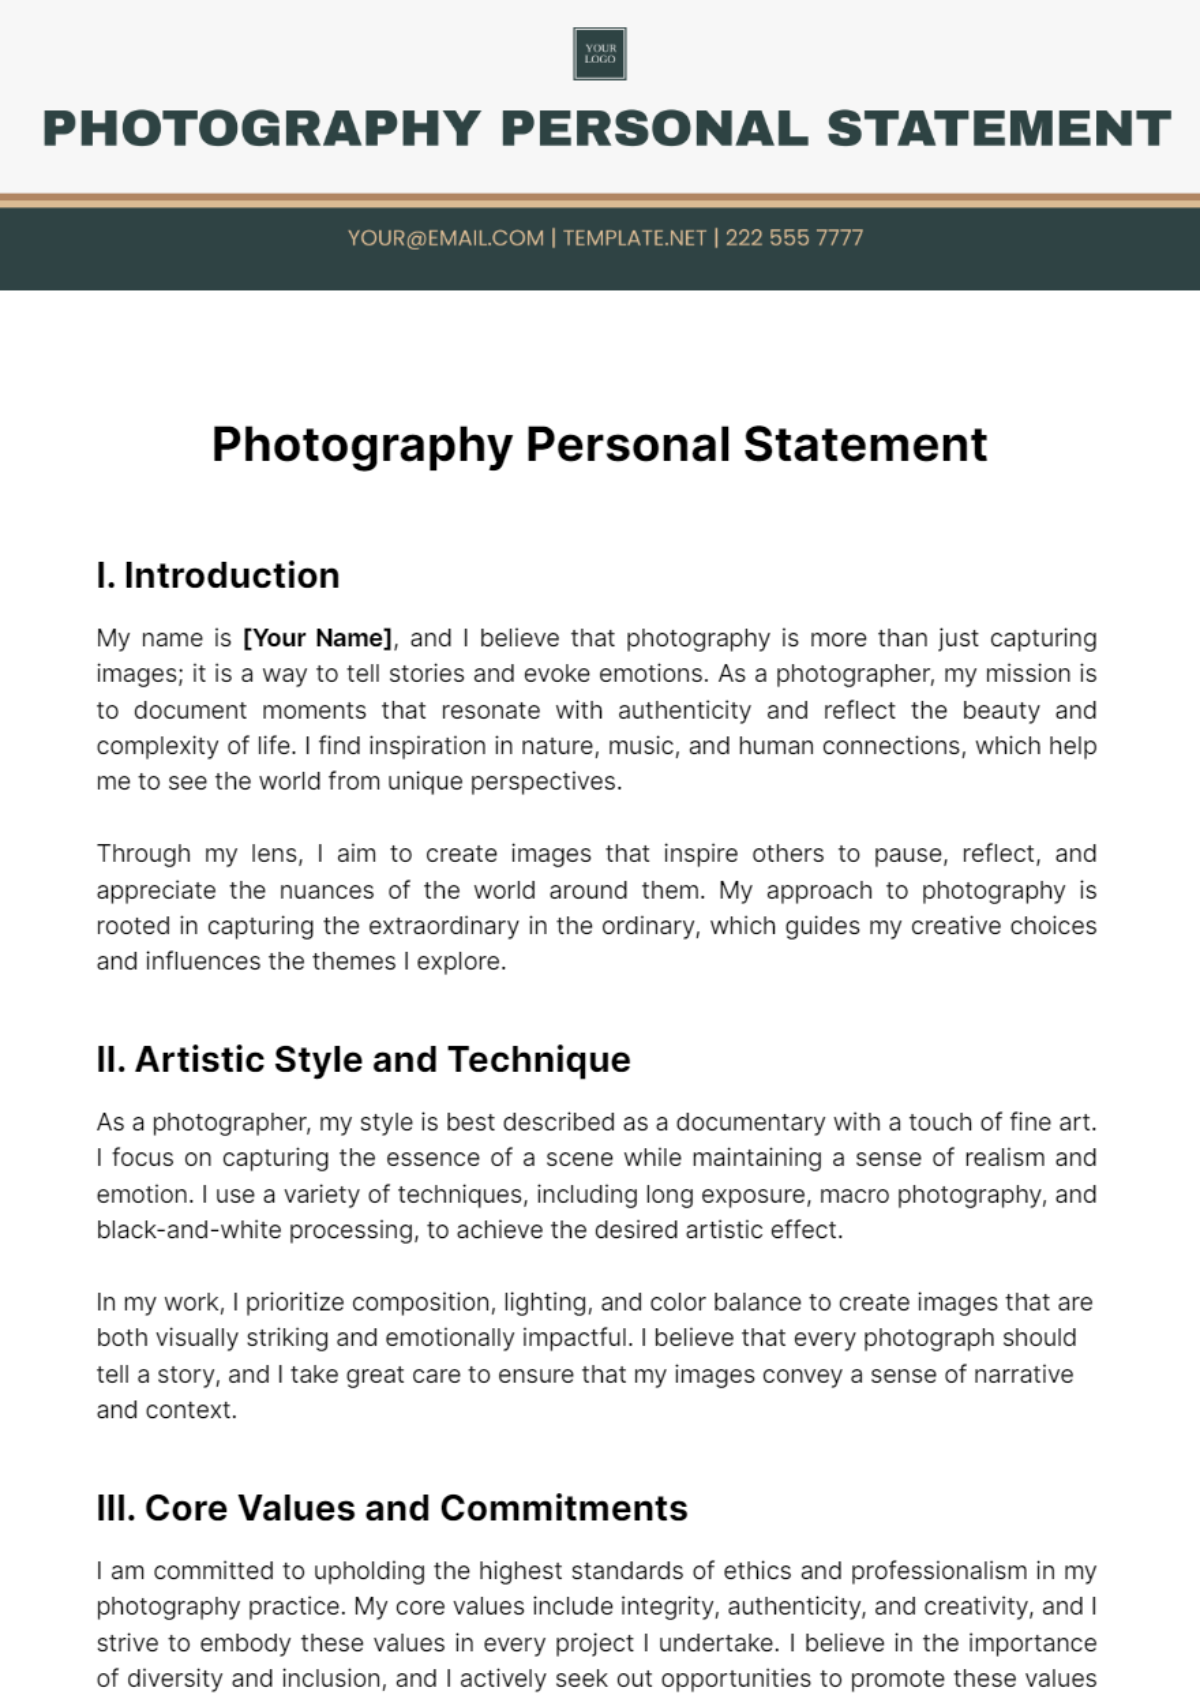 Photography Personal Statement Template